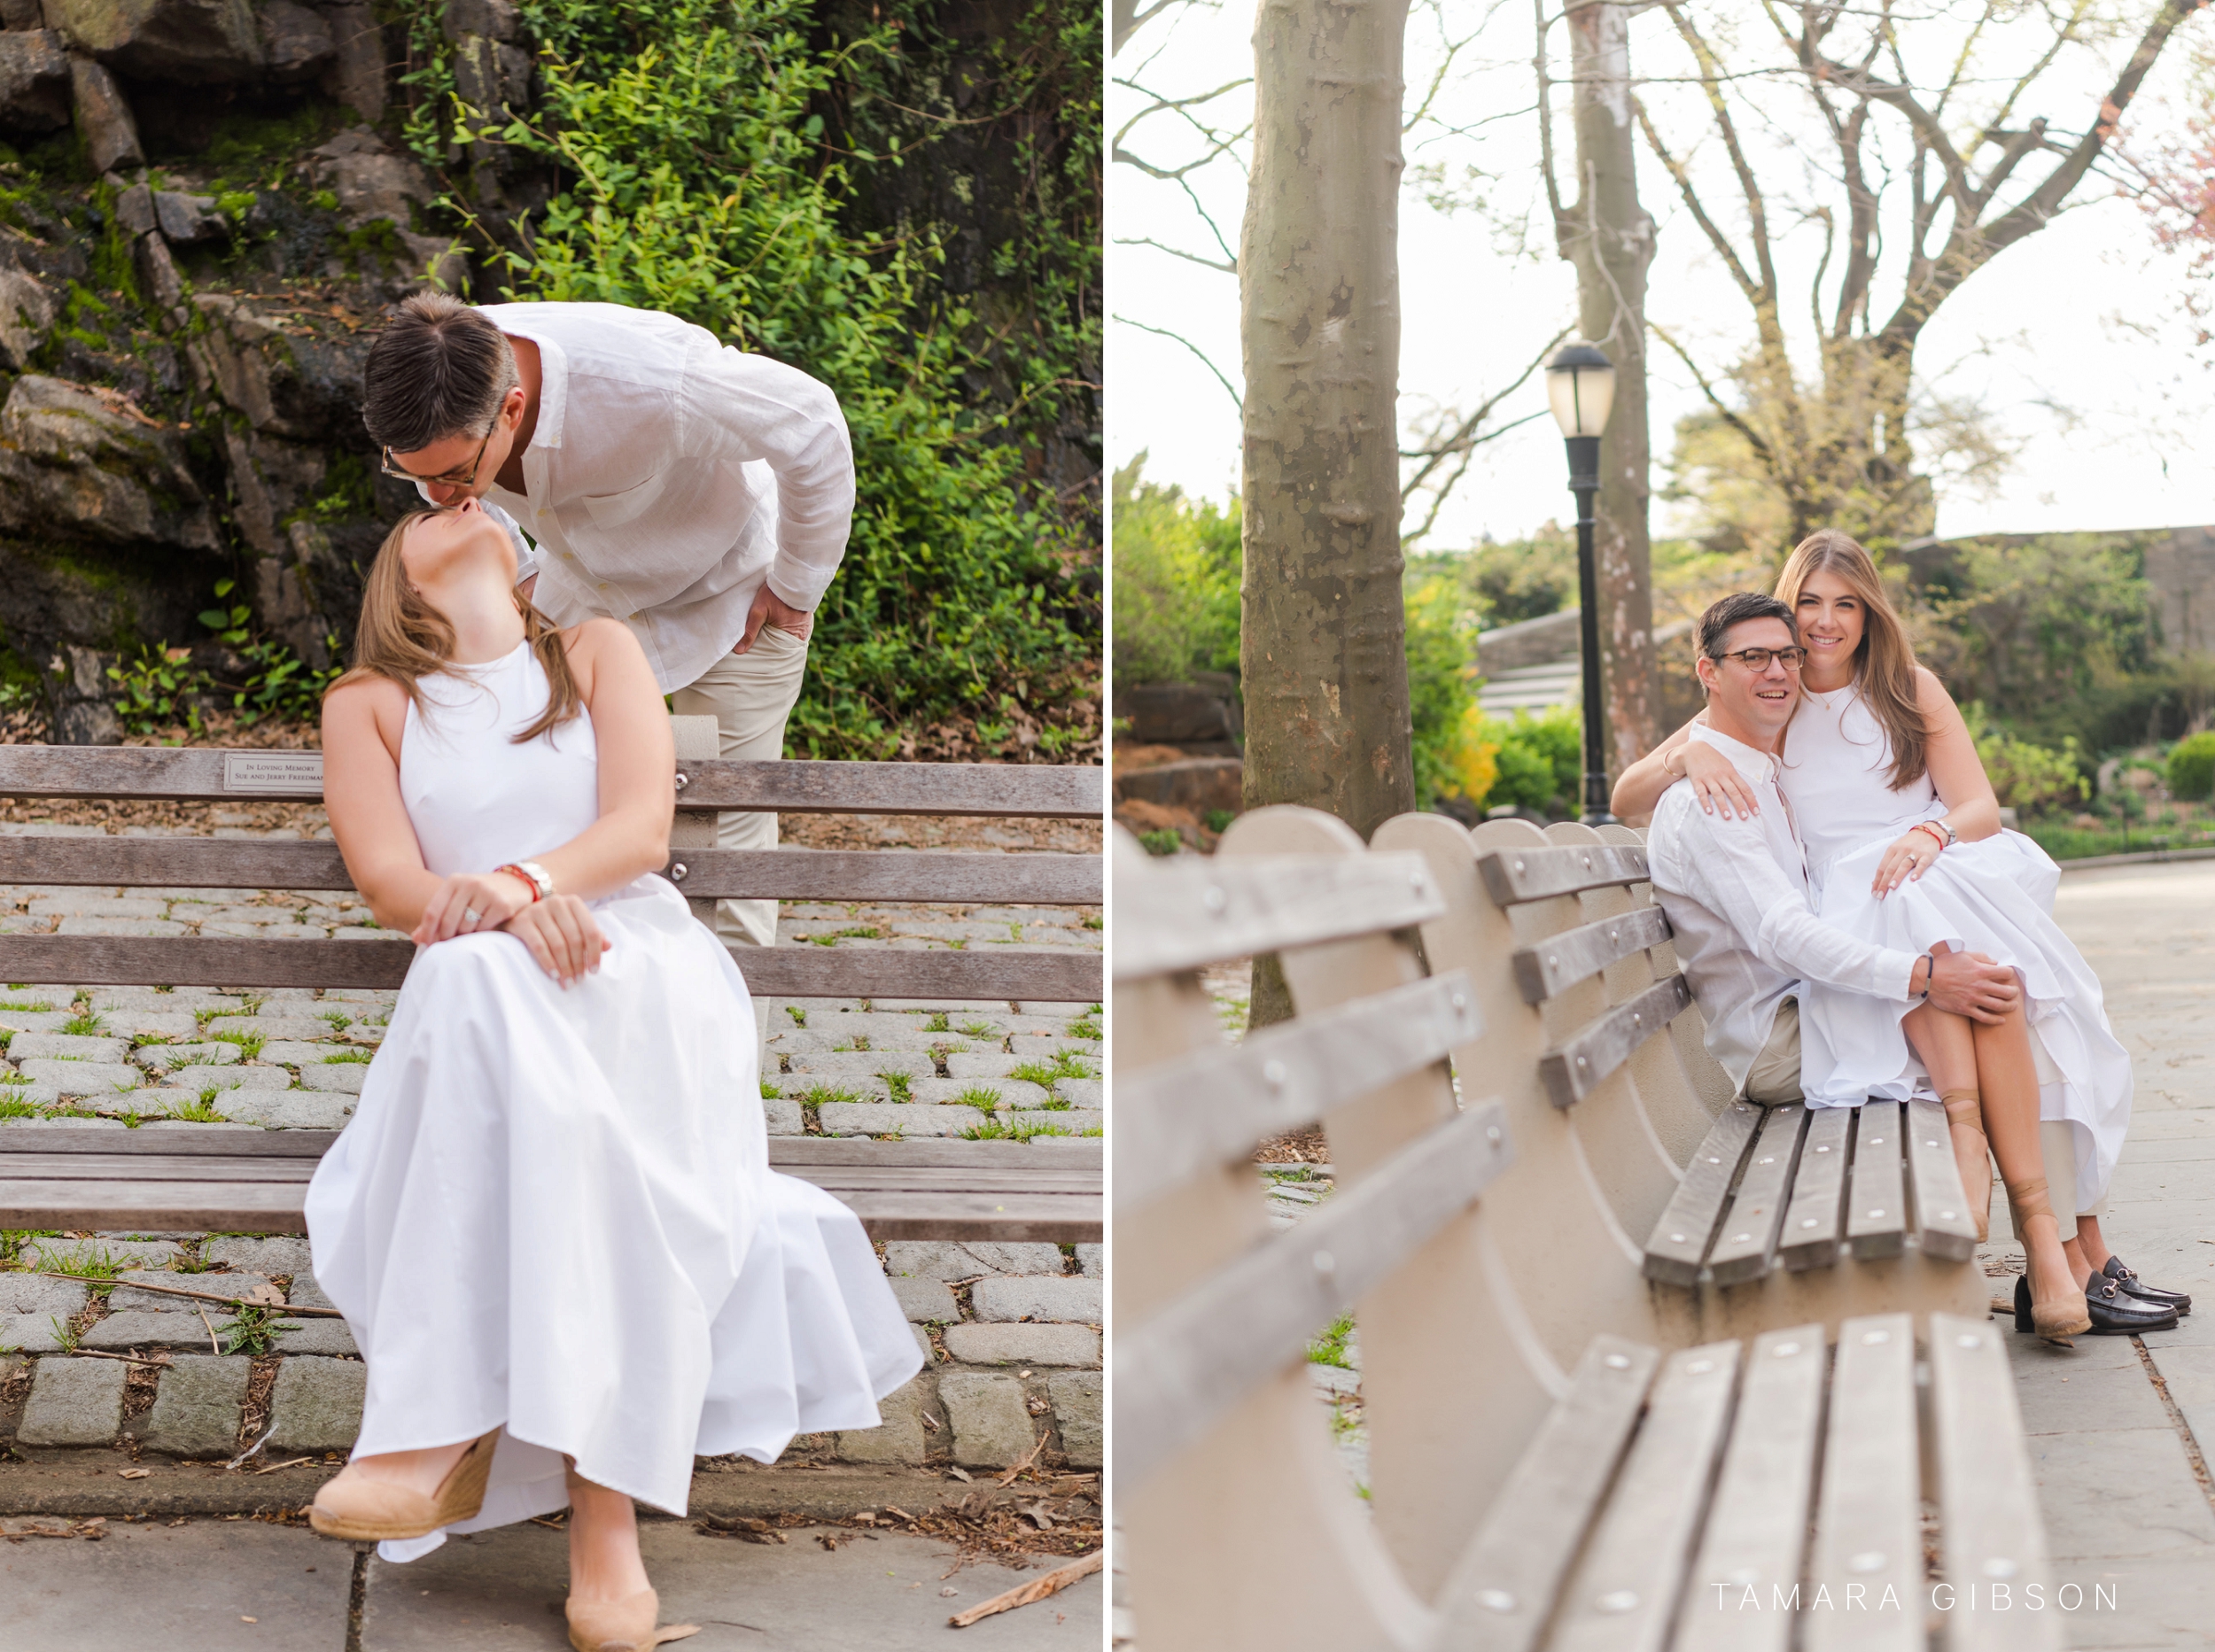 Collage of Couple at park during NYC Engagement Session